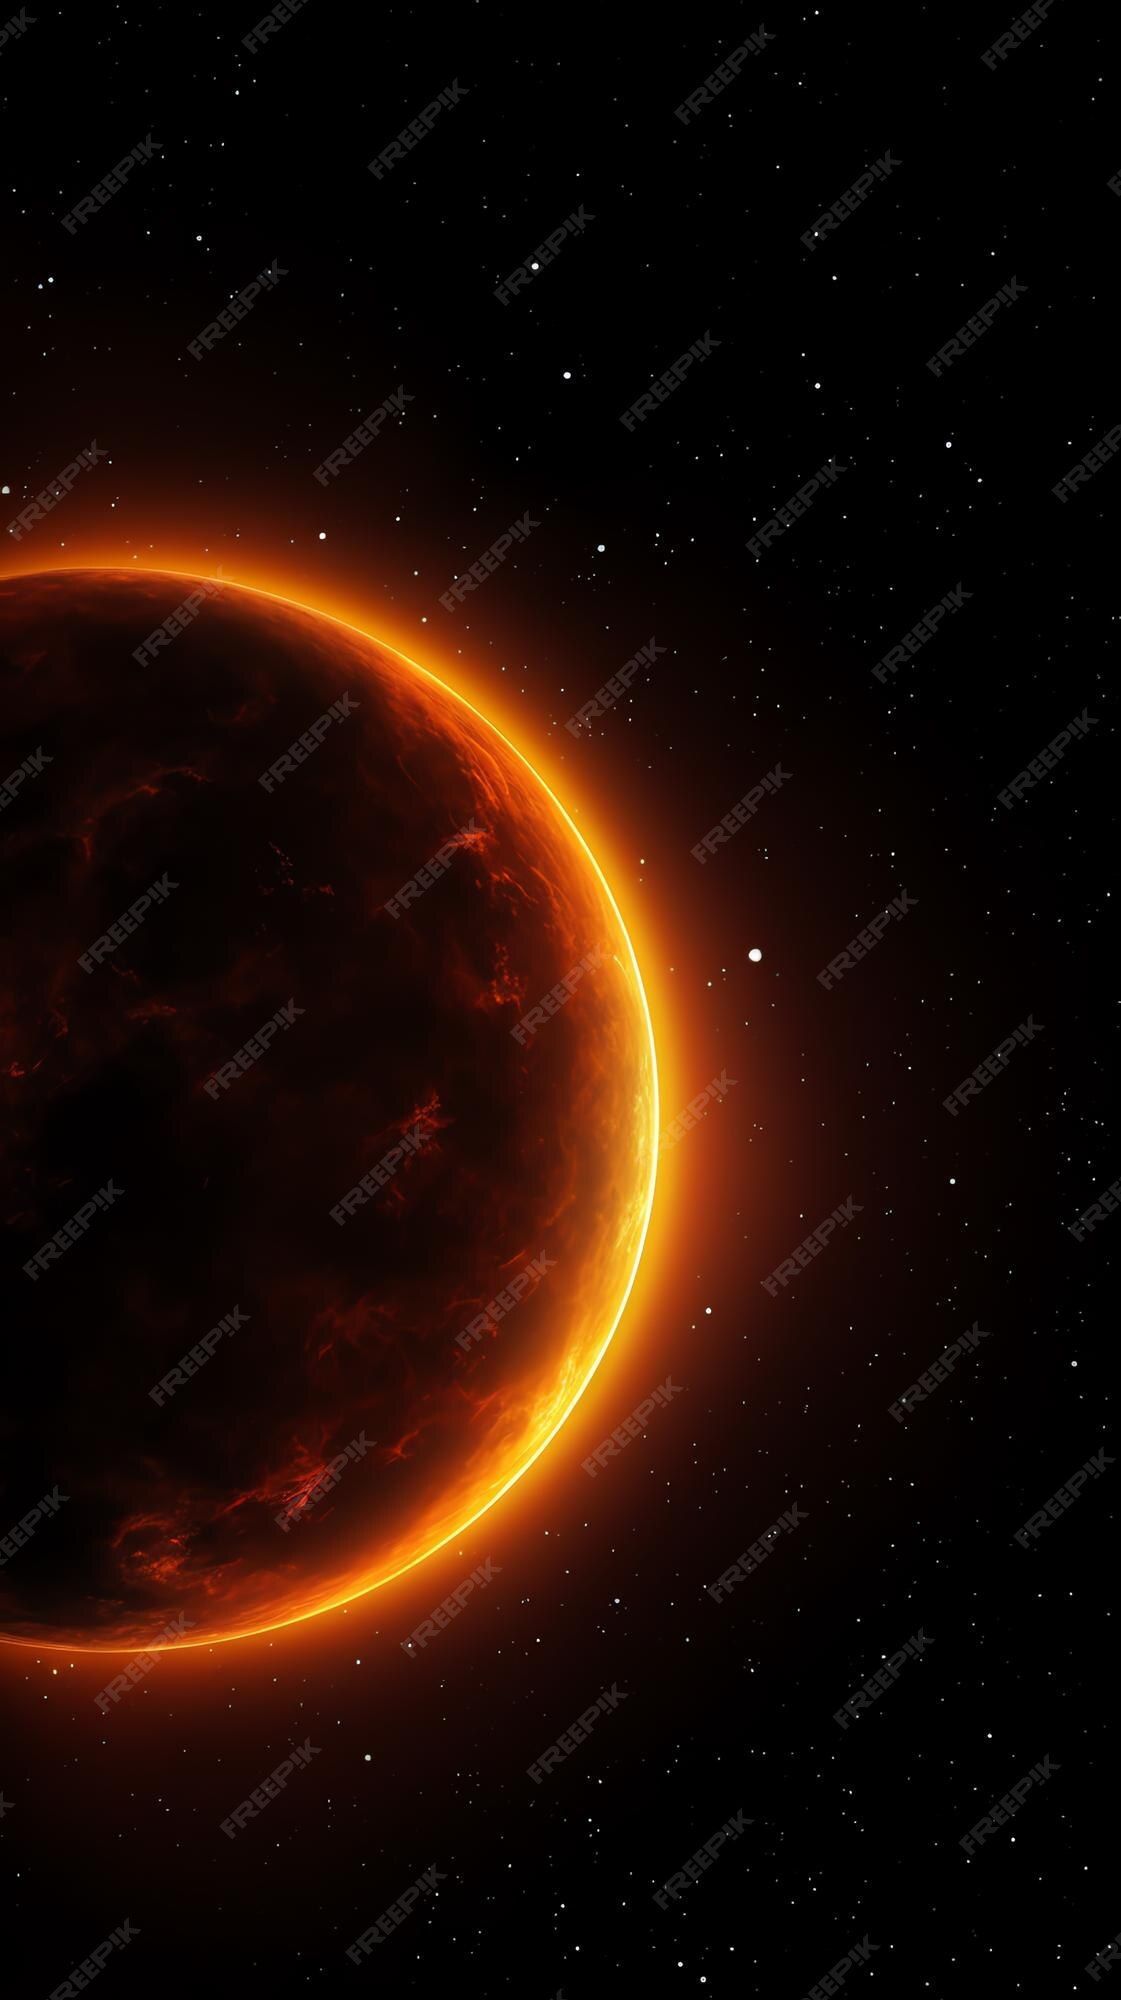 Illustration of a planet in space - Eclipse